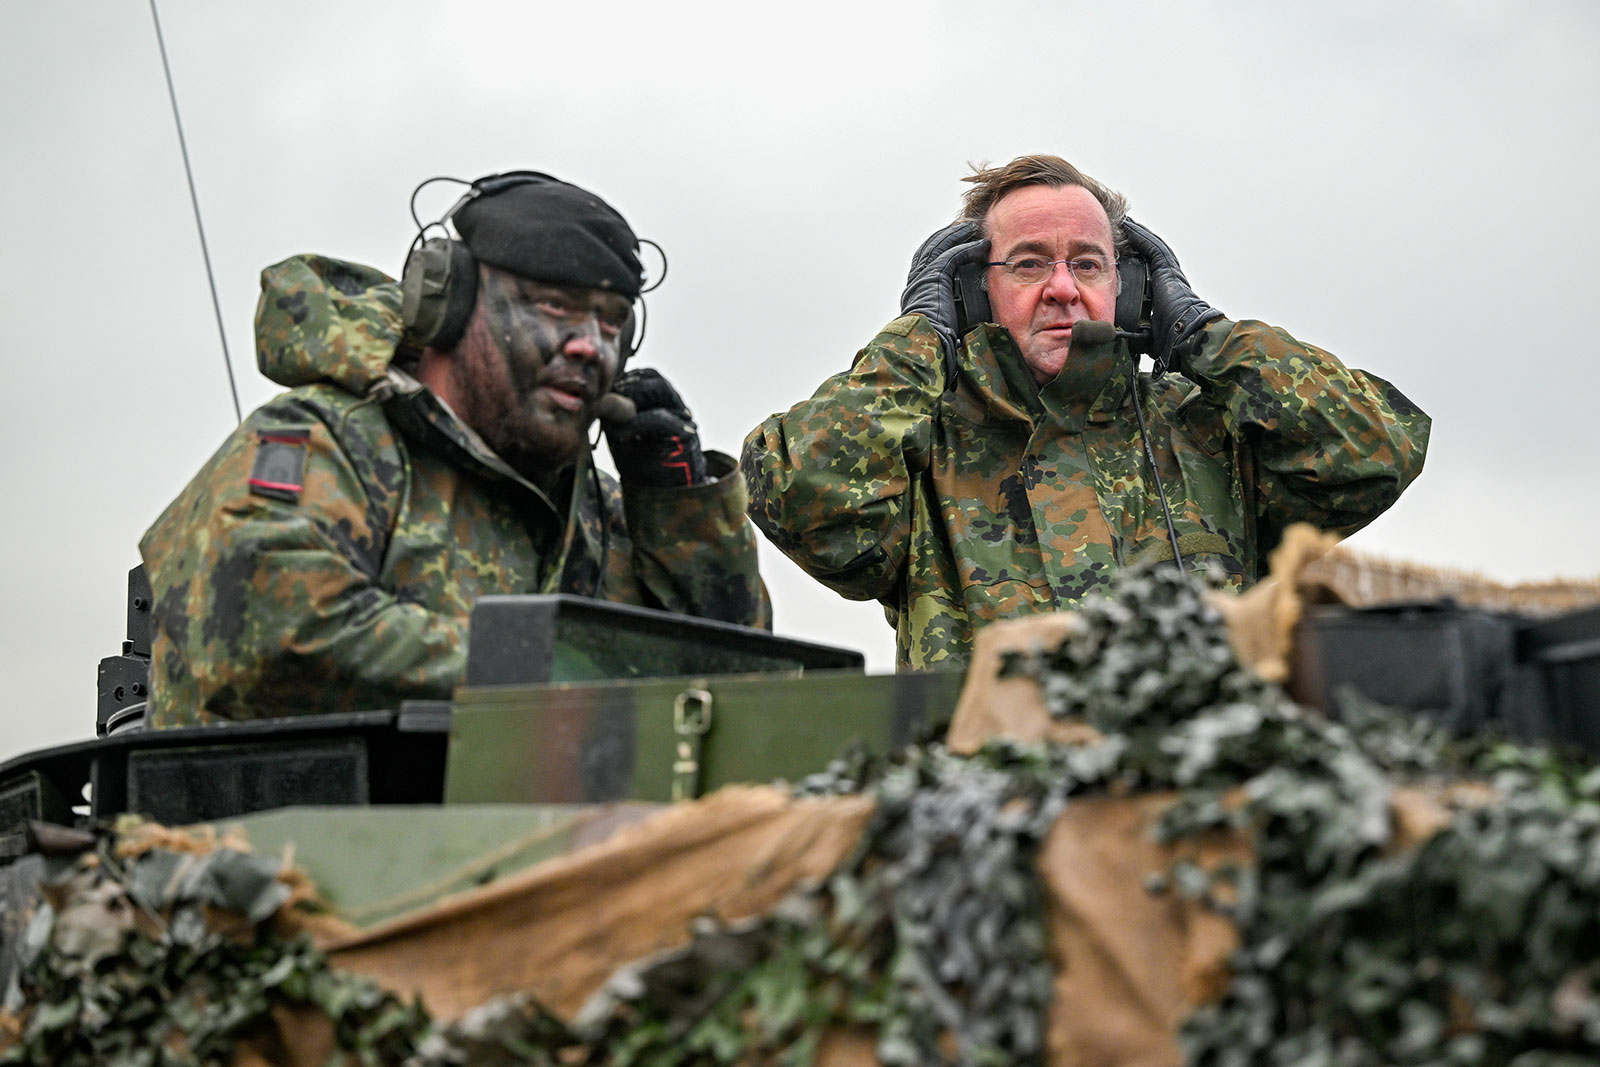 German Defense Minister Boris Pistorius rides in a Leopard 2 A6 main battle tank during a visit to the Bundeswehr's Panzerbataillon 203 tank squadron on February 1 in Augustdorf, Germany. 